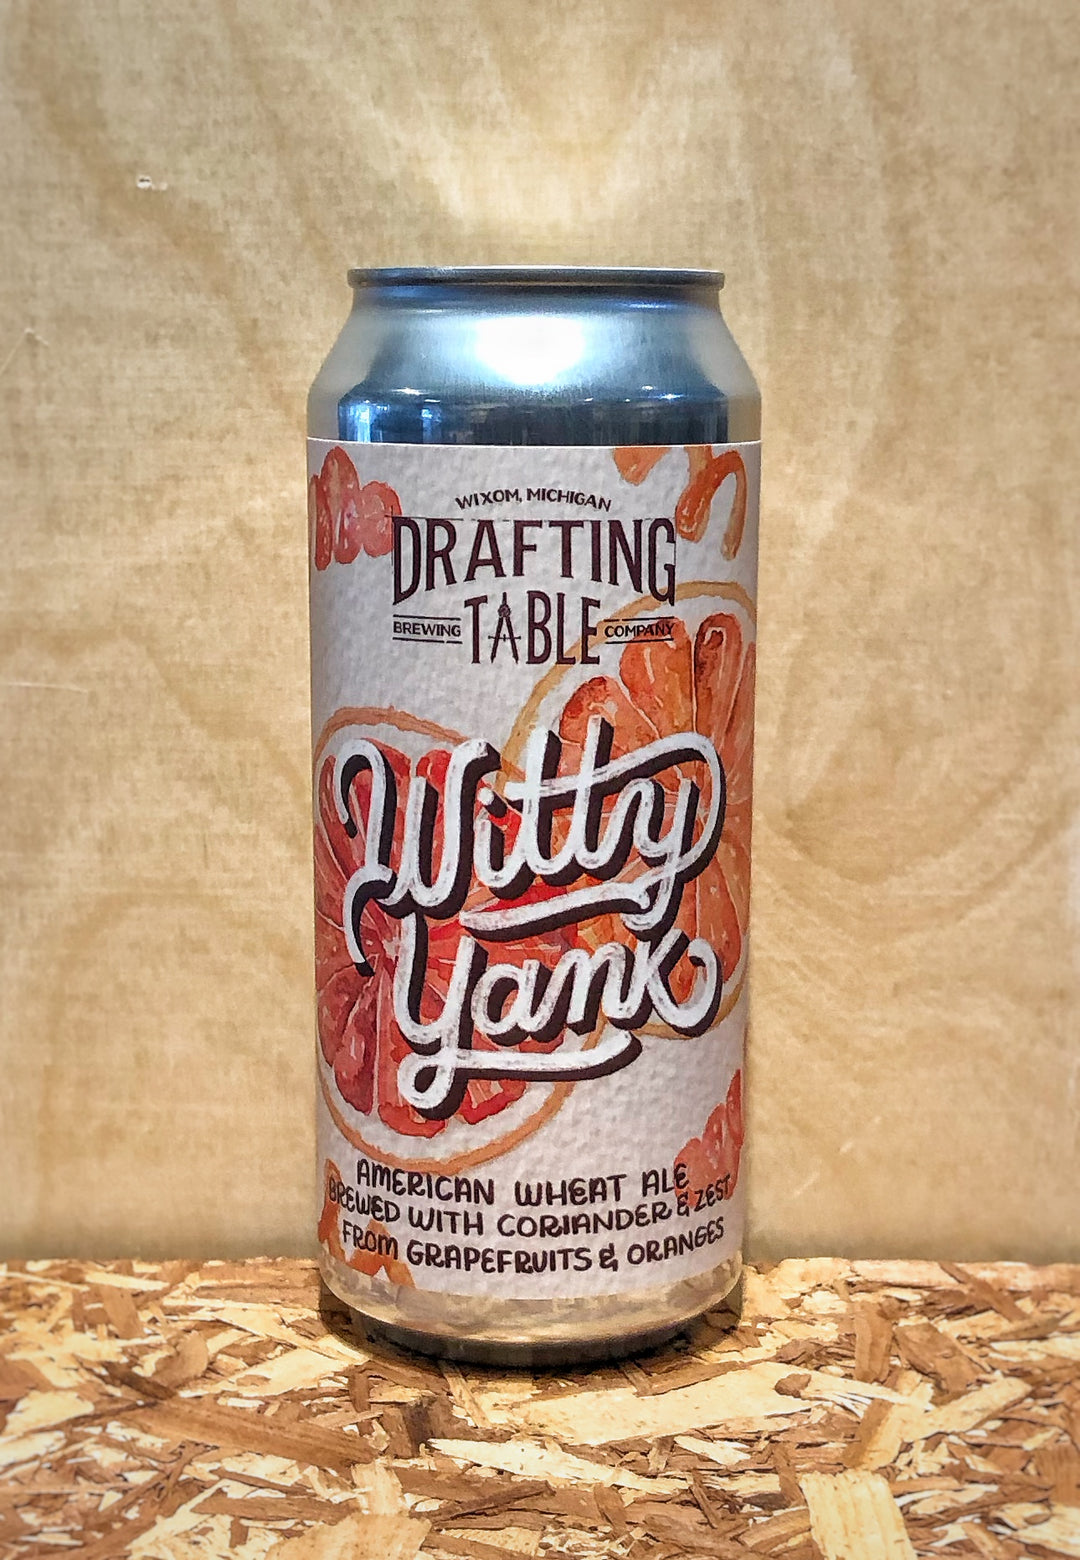 Drafting Table 'Witty Yank' American Wheat Ale with Coriander & Zest from Grapefruits & Oranges (Wixom, MI)